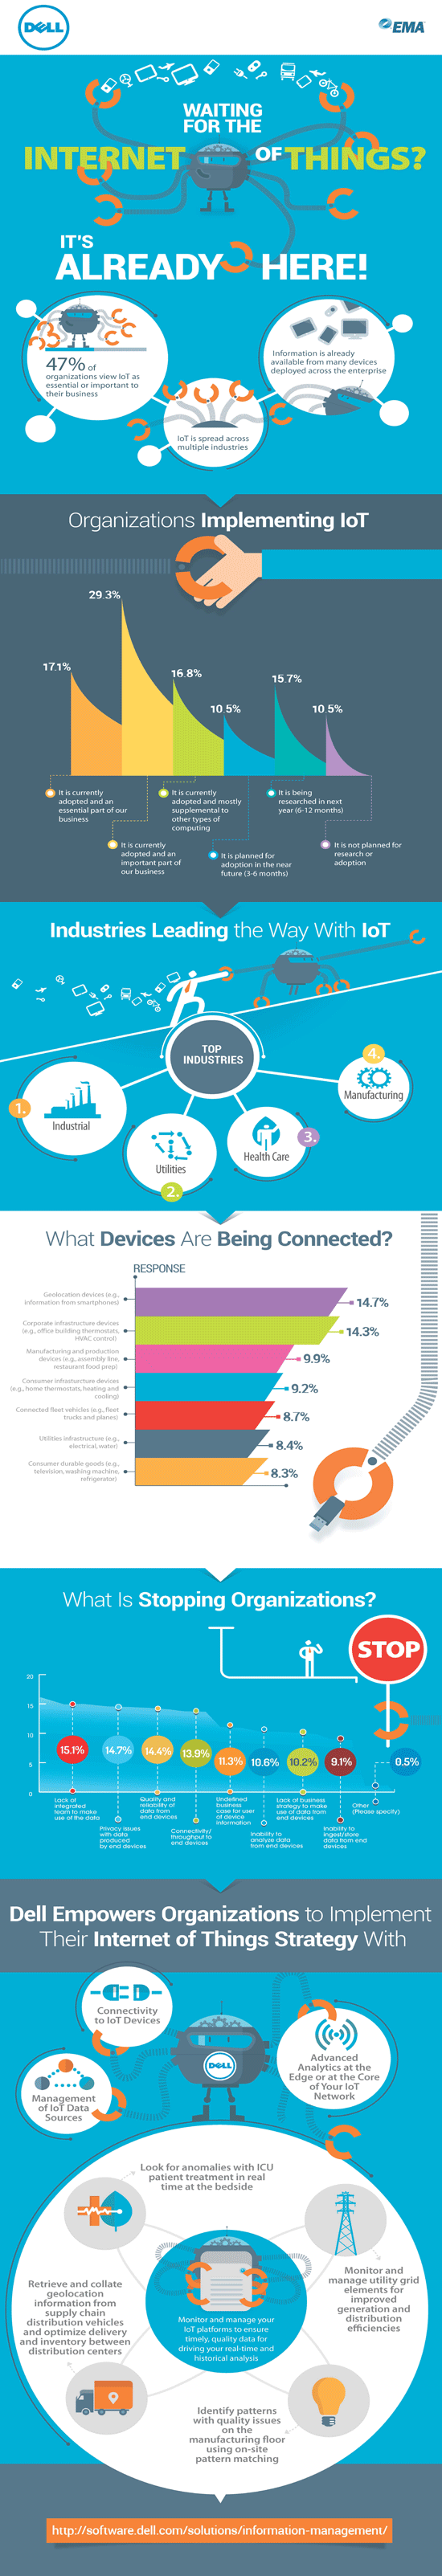 Infographic about the Internet of Things prepared by EMA for Dell